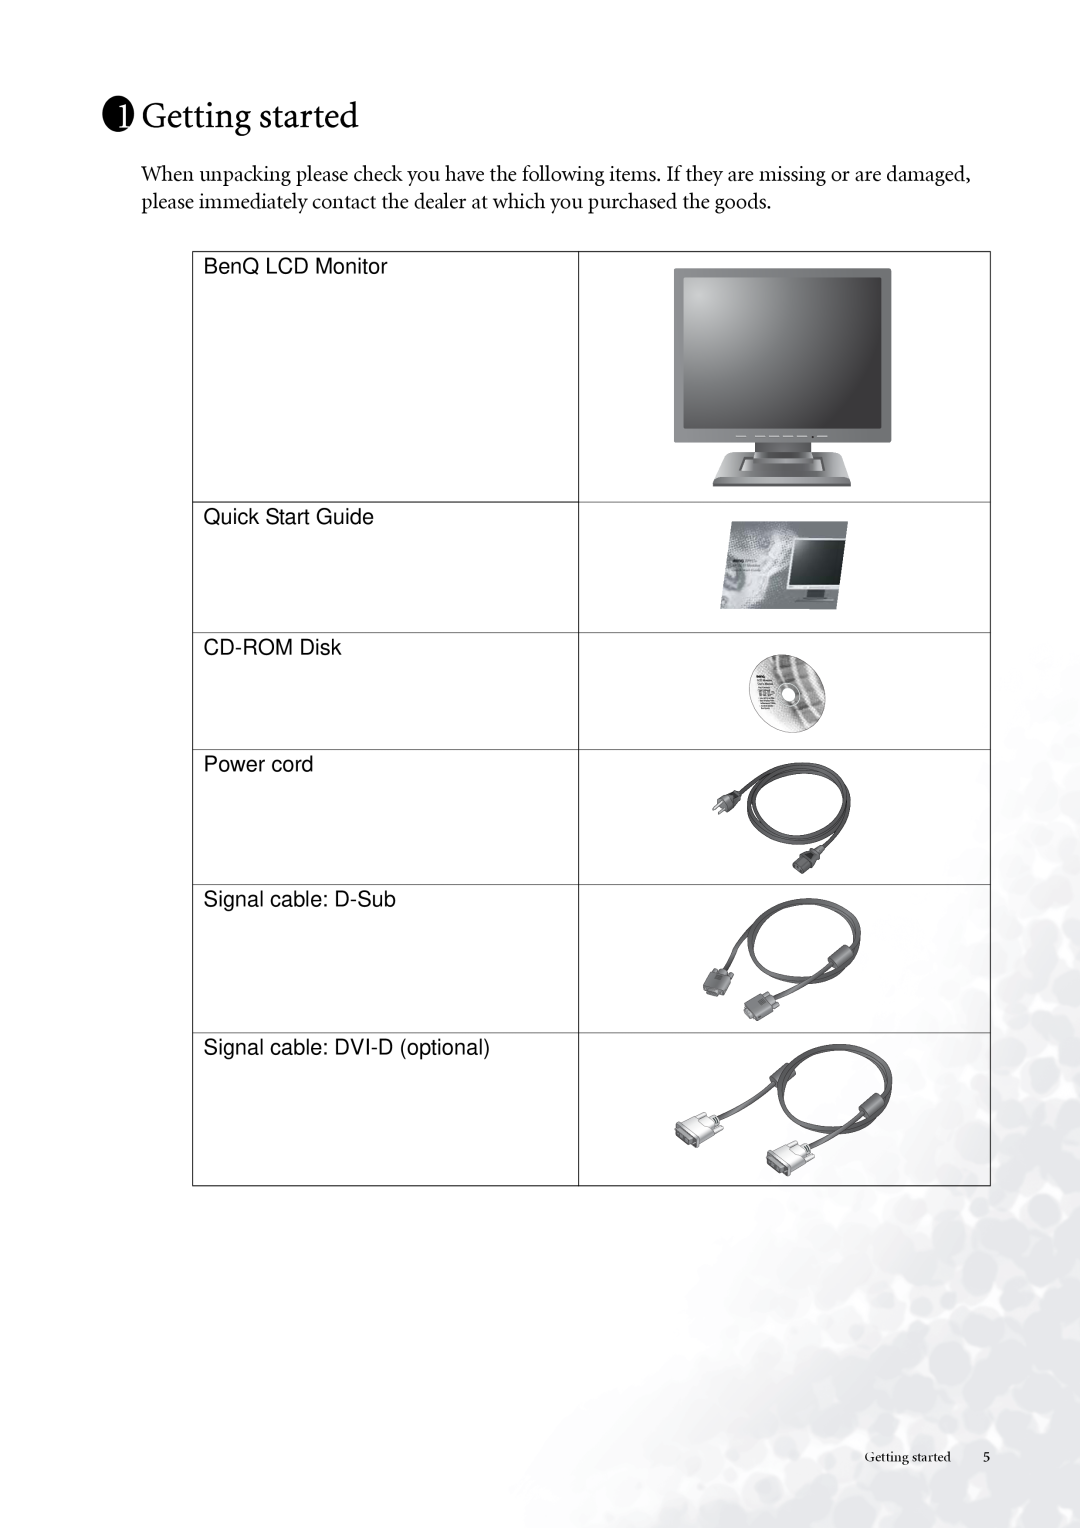 BenQ FP937s user manual Getting started, BenQ LCD Monitor, Quick Start Guide, CD-ROM Disk, Power cord, Signal cable D-Sub 